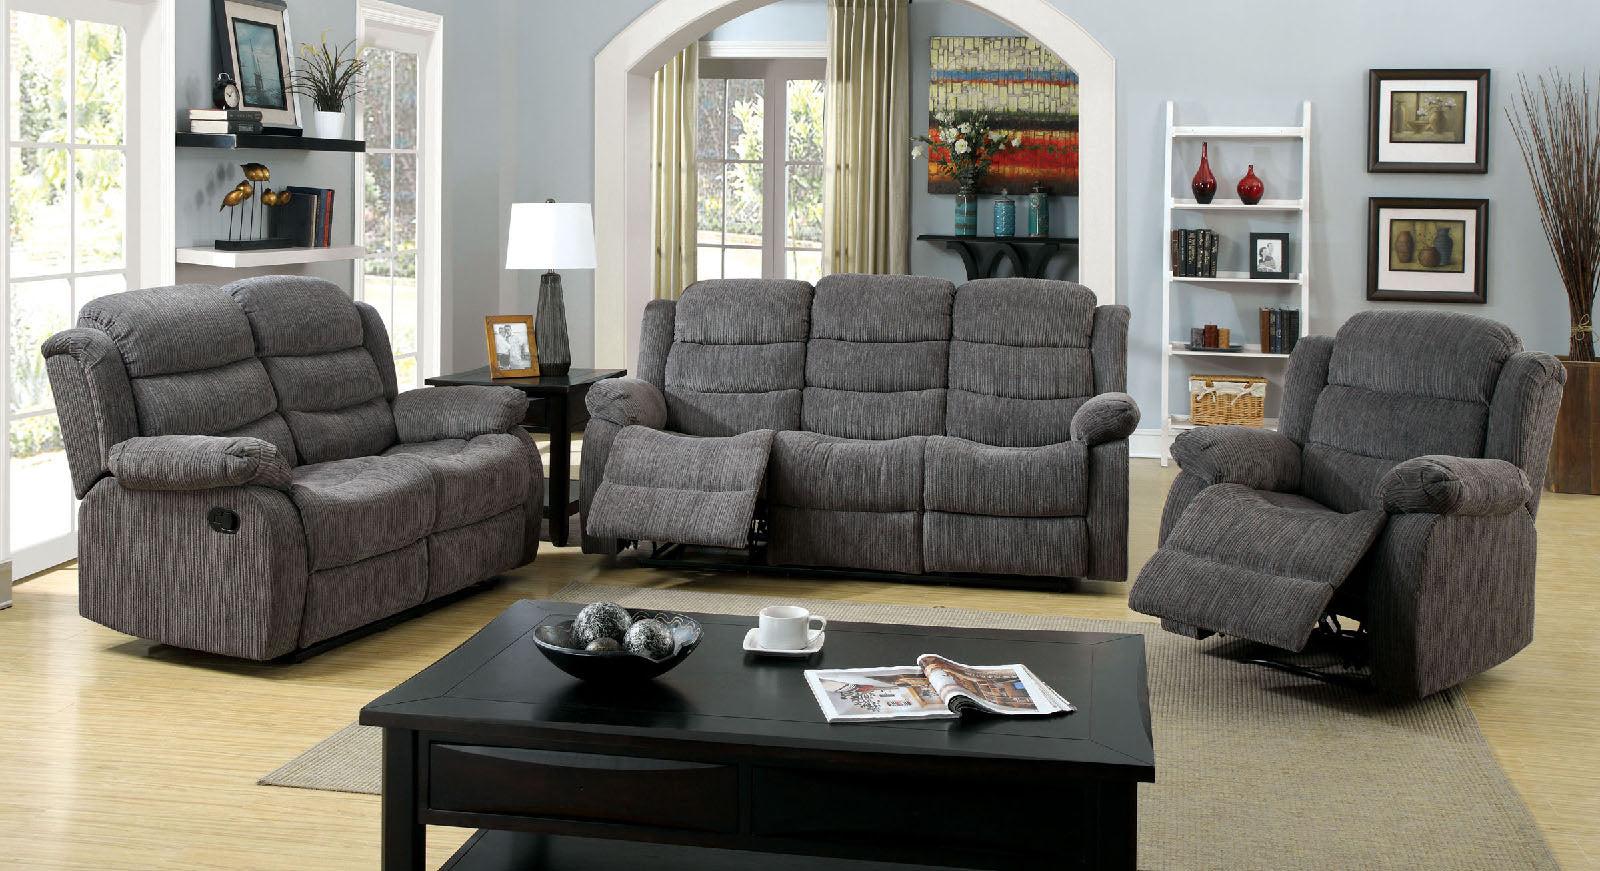 Transitional Recliner Sofa Loveseat and Chair CM6173GY-3PC Millville CM6173GY-3PC in Gray Chenille